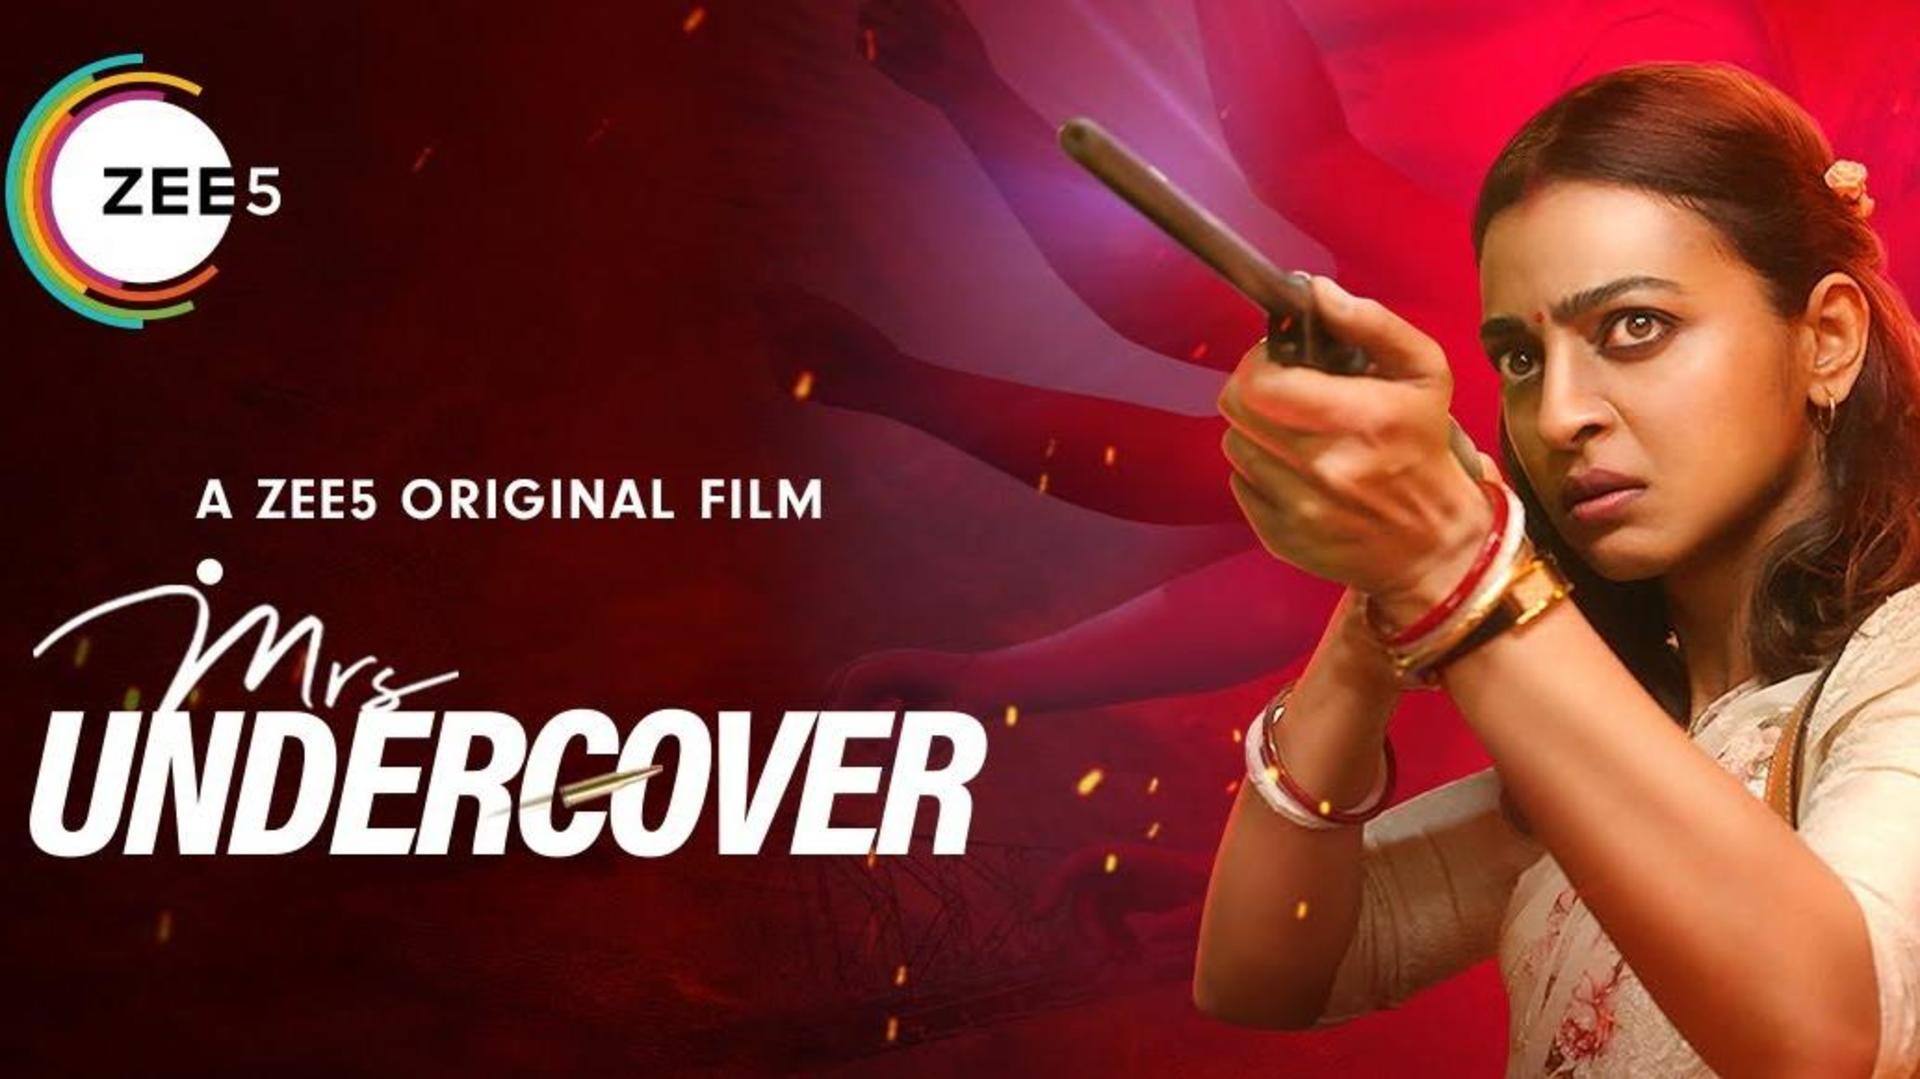 ZEE5's 'Mrs. Undercover' starring Radhika Apte: Trailer out